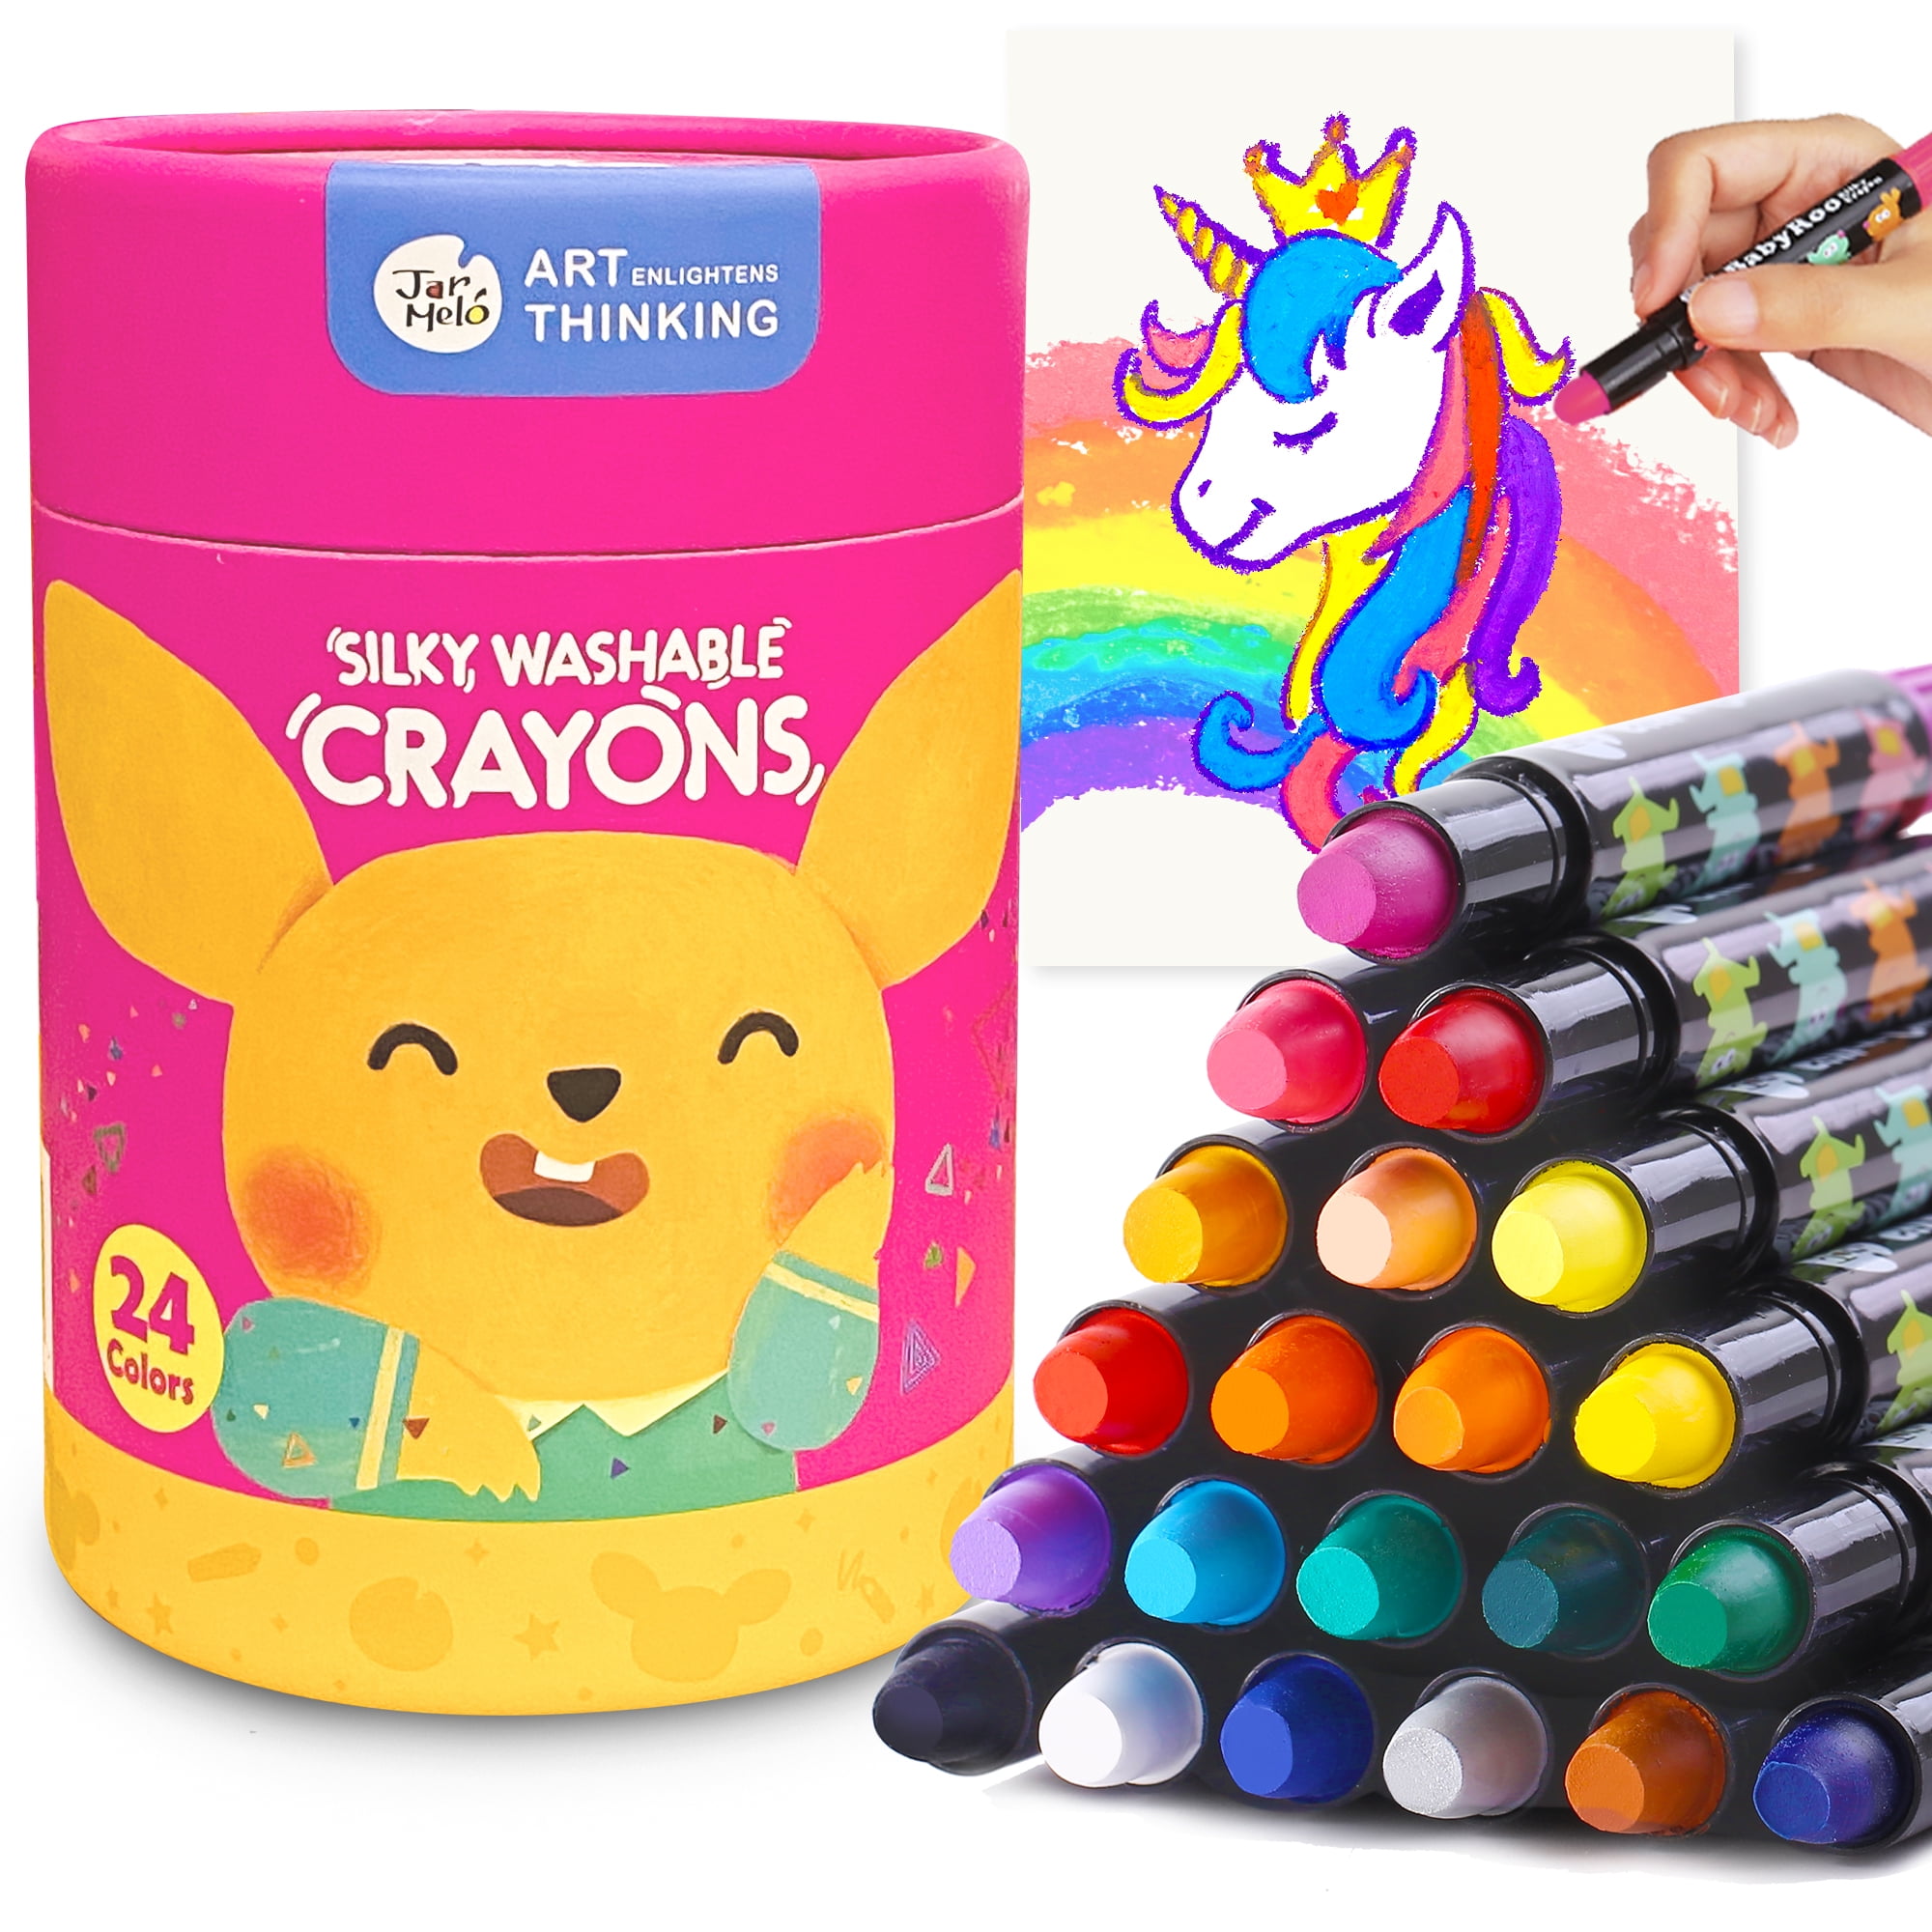 The Best Board Games for 6 Year Olds - Lipgloss and Crayons